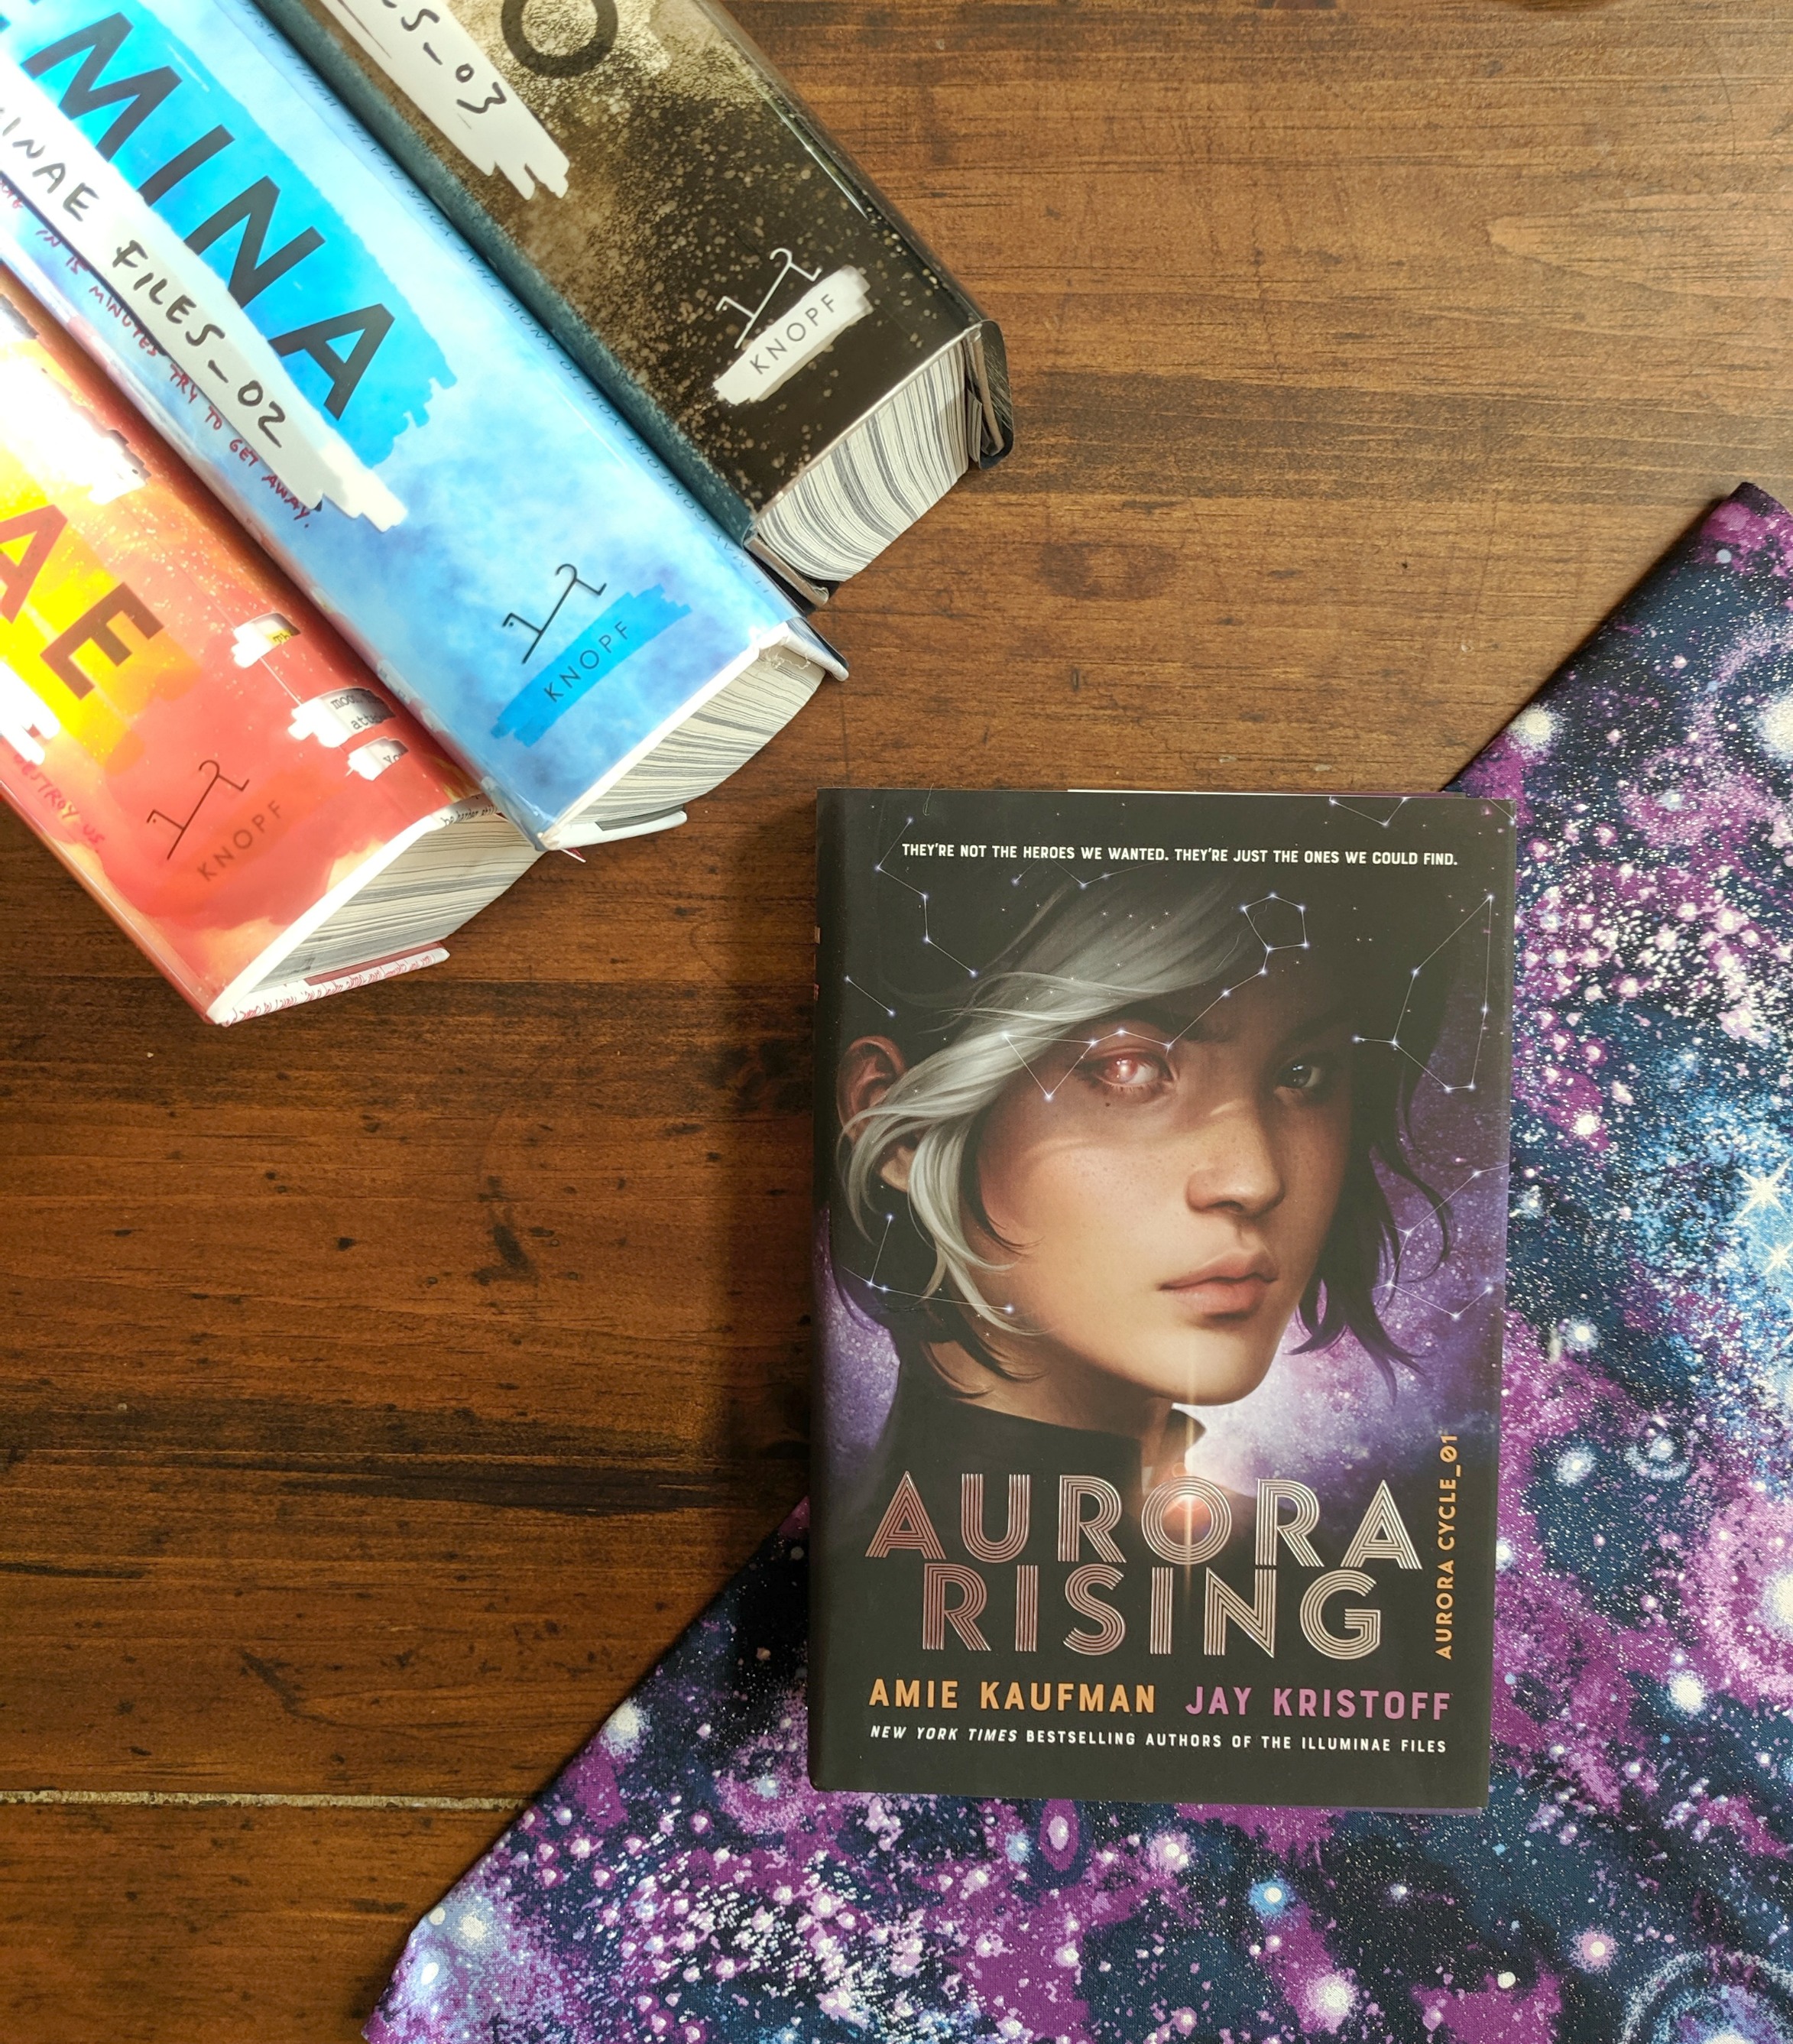 Squad Goals In Space: Aurora Rising by Jay Kristoff and Amie Kaufman – Book  Scents